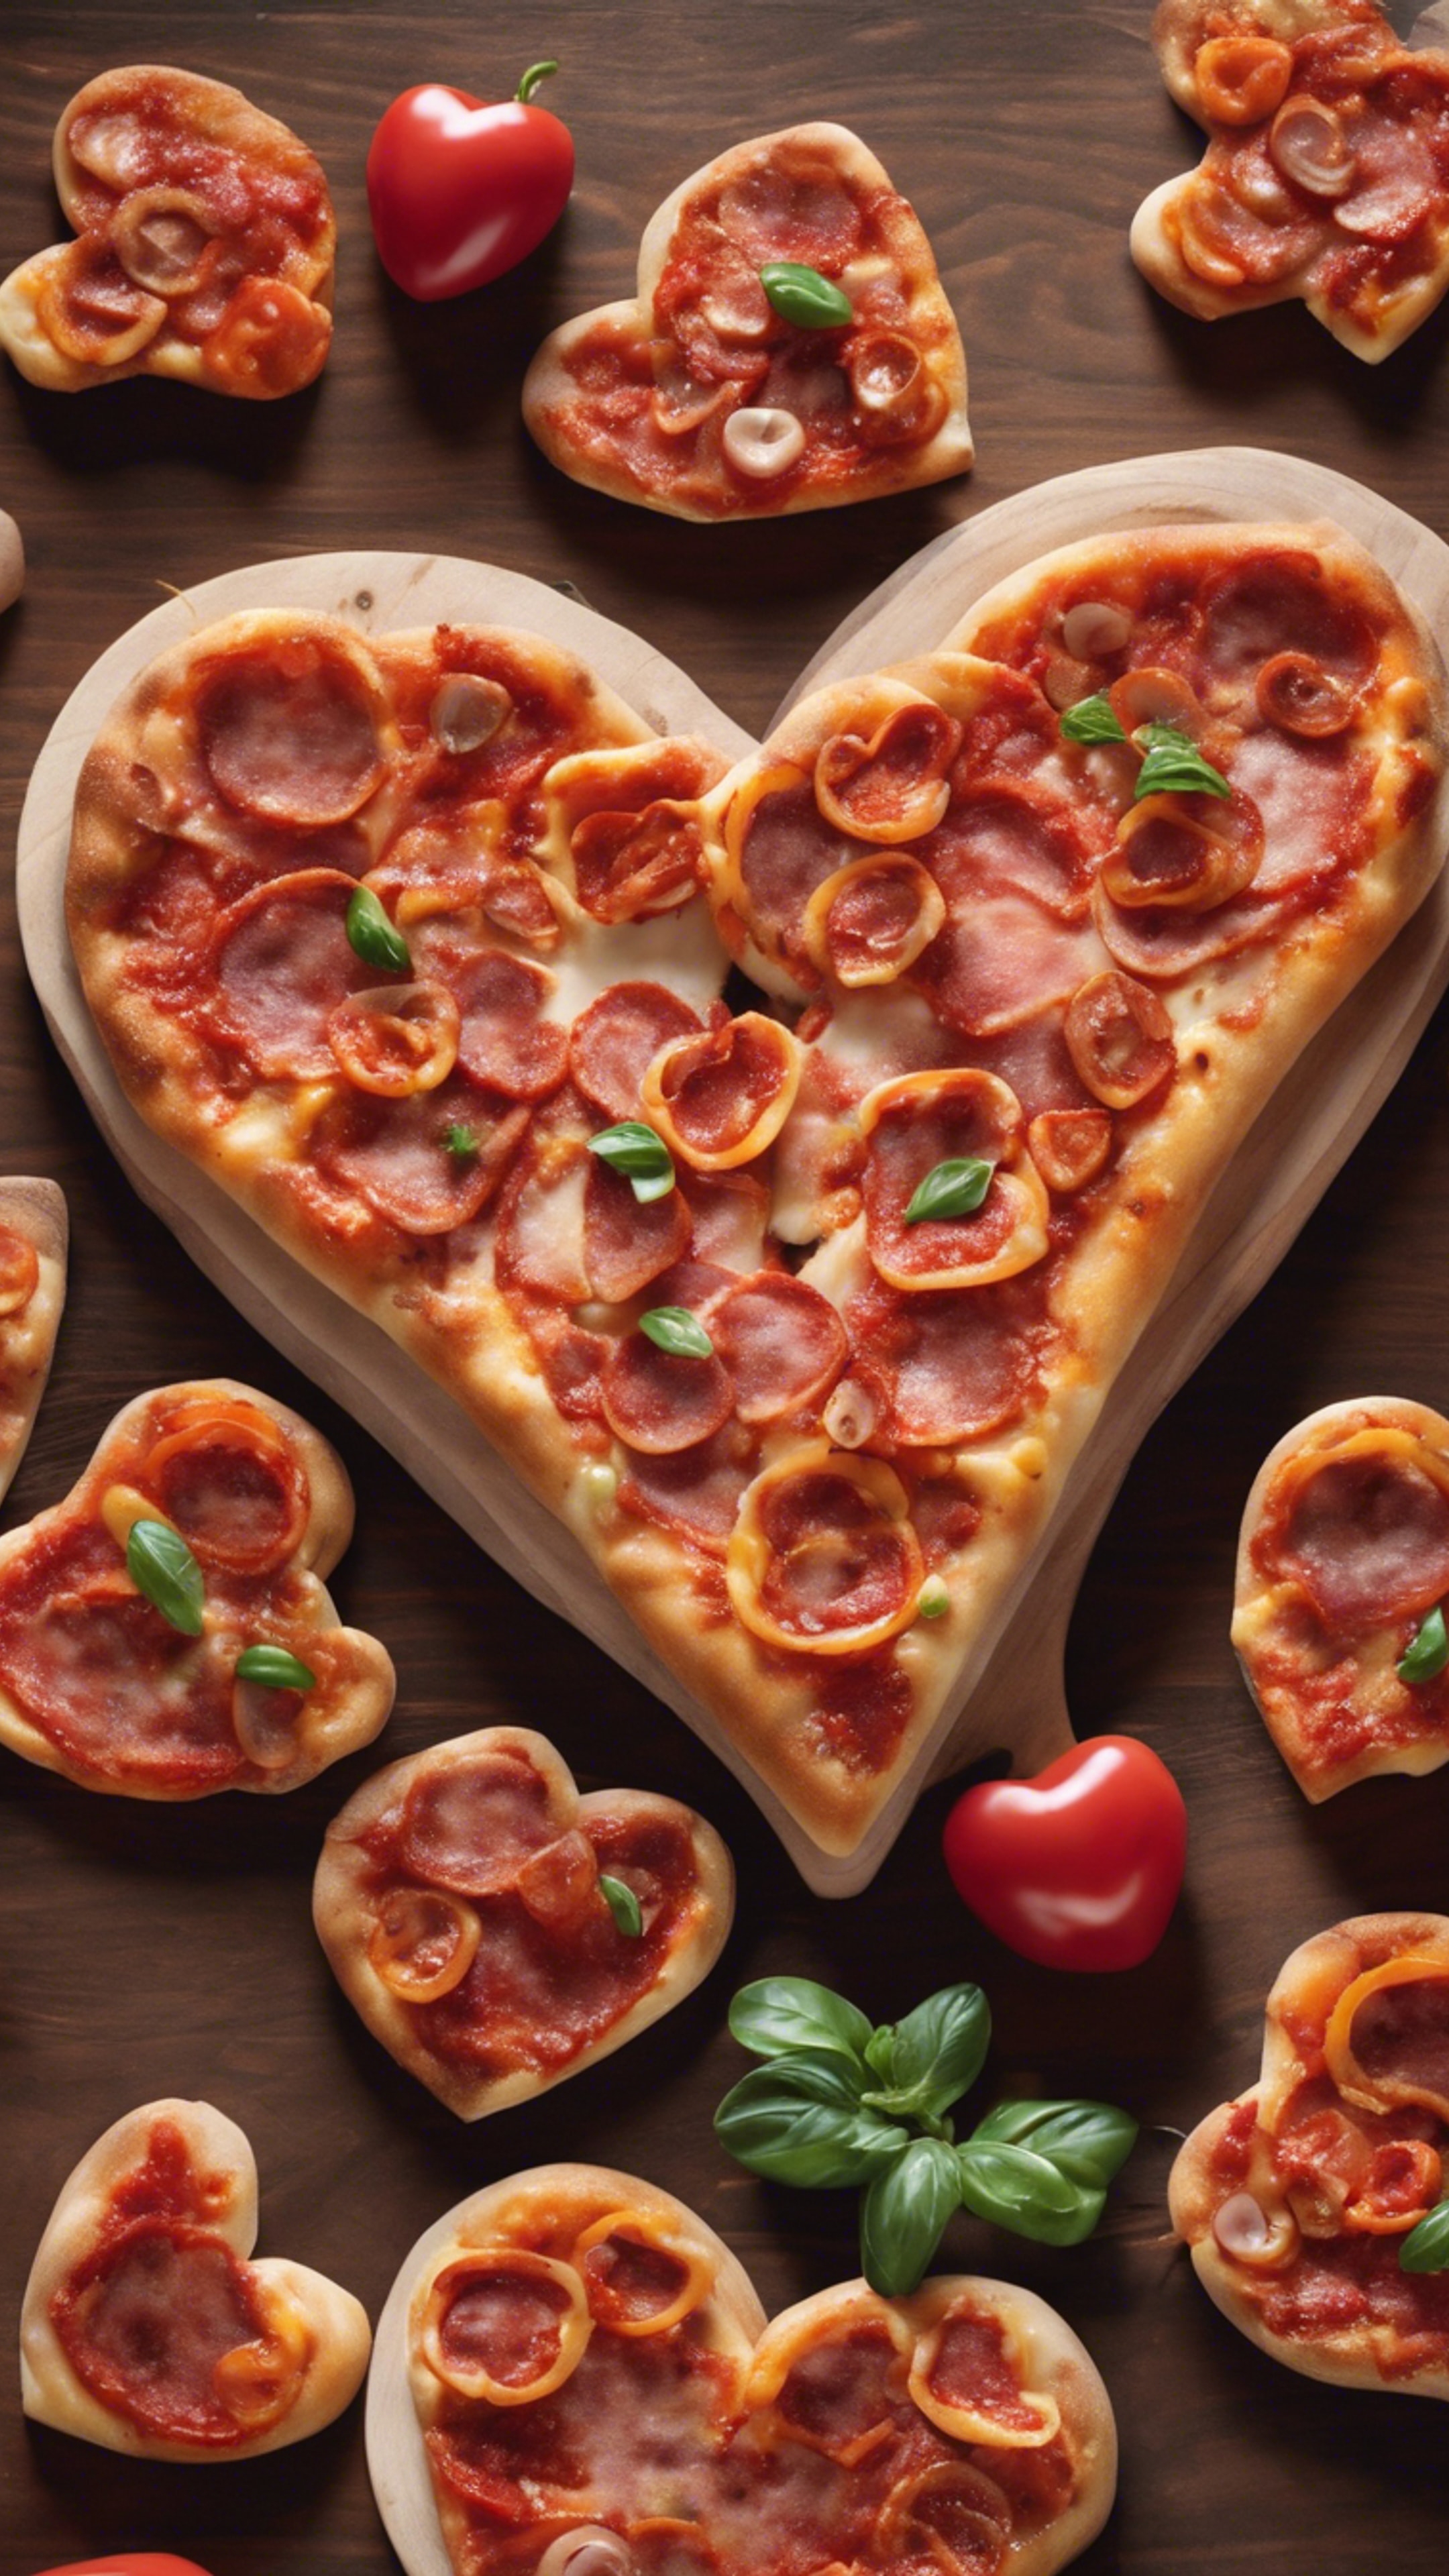 A heart-shaped pizza topped with pepperonis arranged in a smaller heart shape, the perfect cuisine for a romantic date. Divar kağızı[15df62b77c2f46a18143]